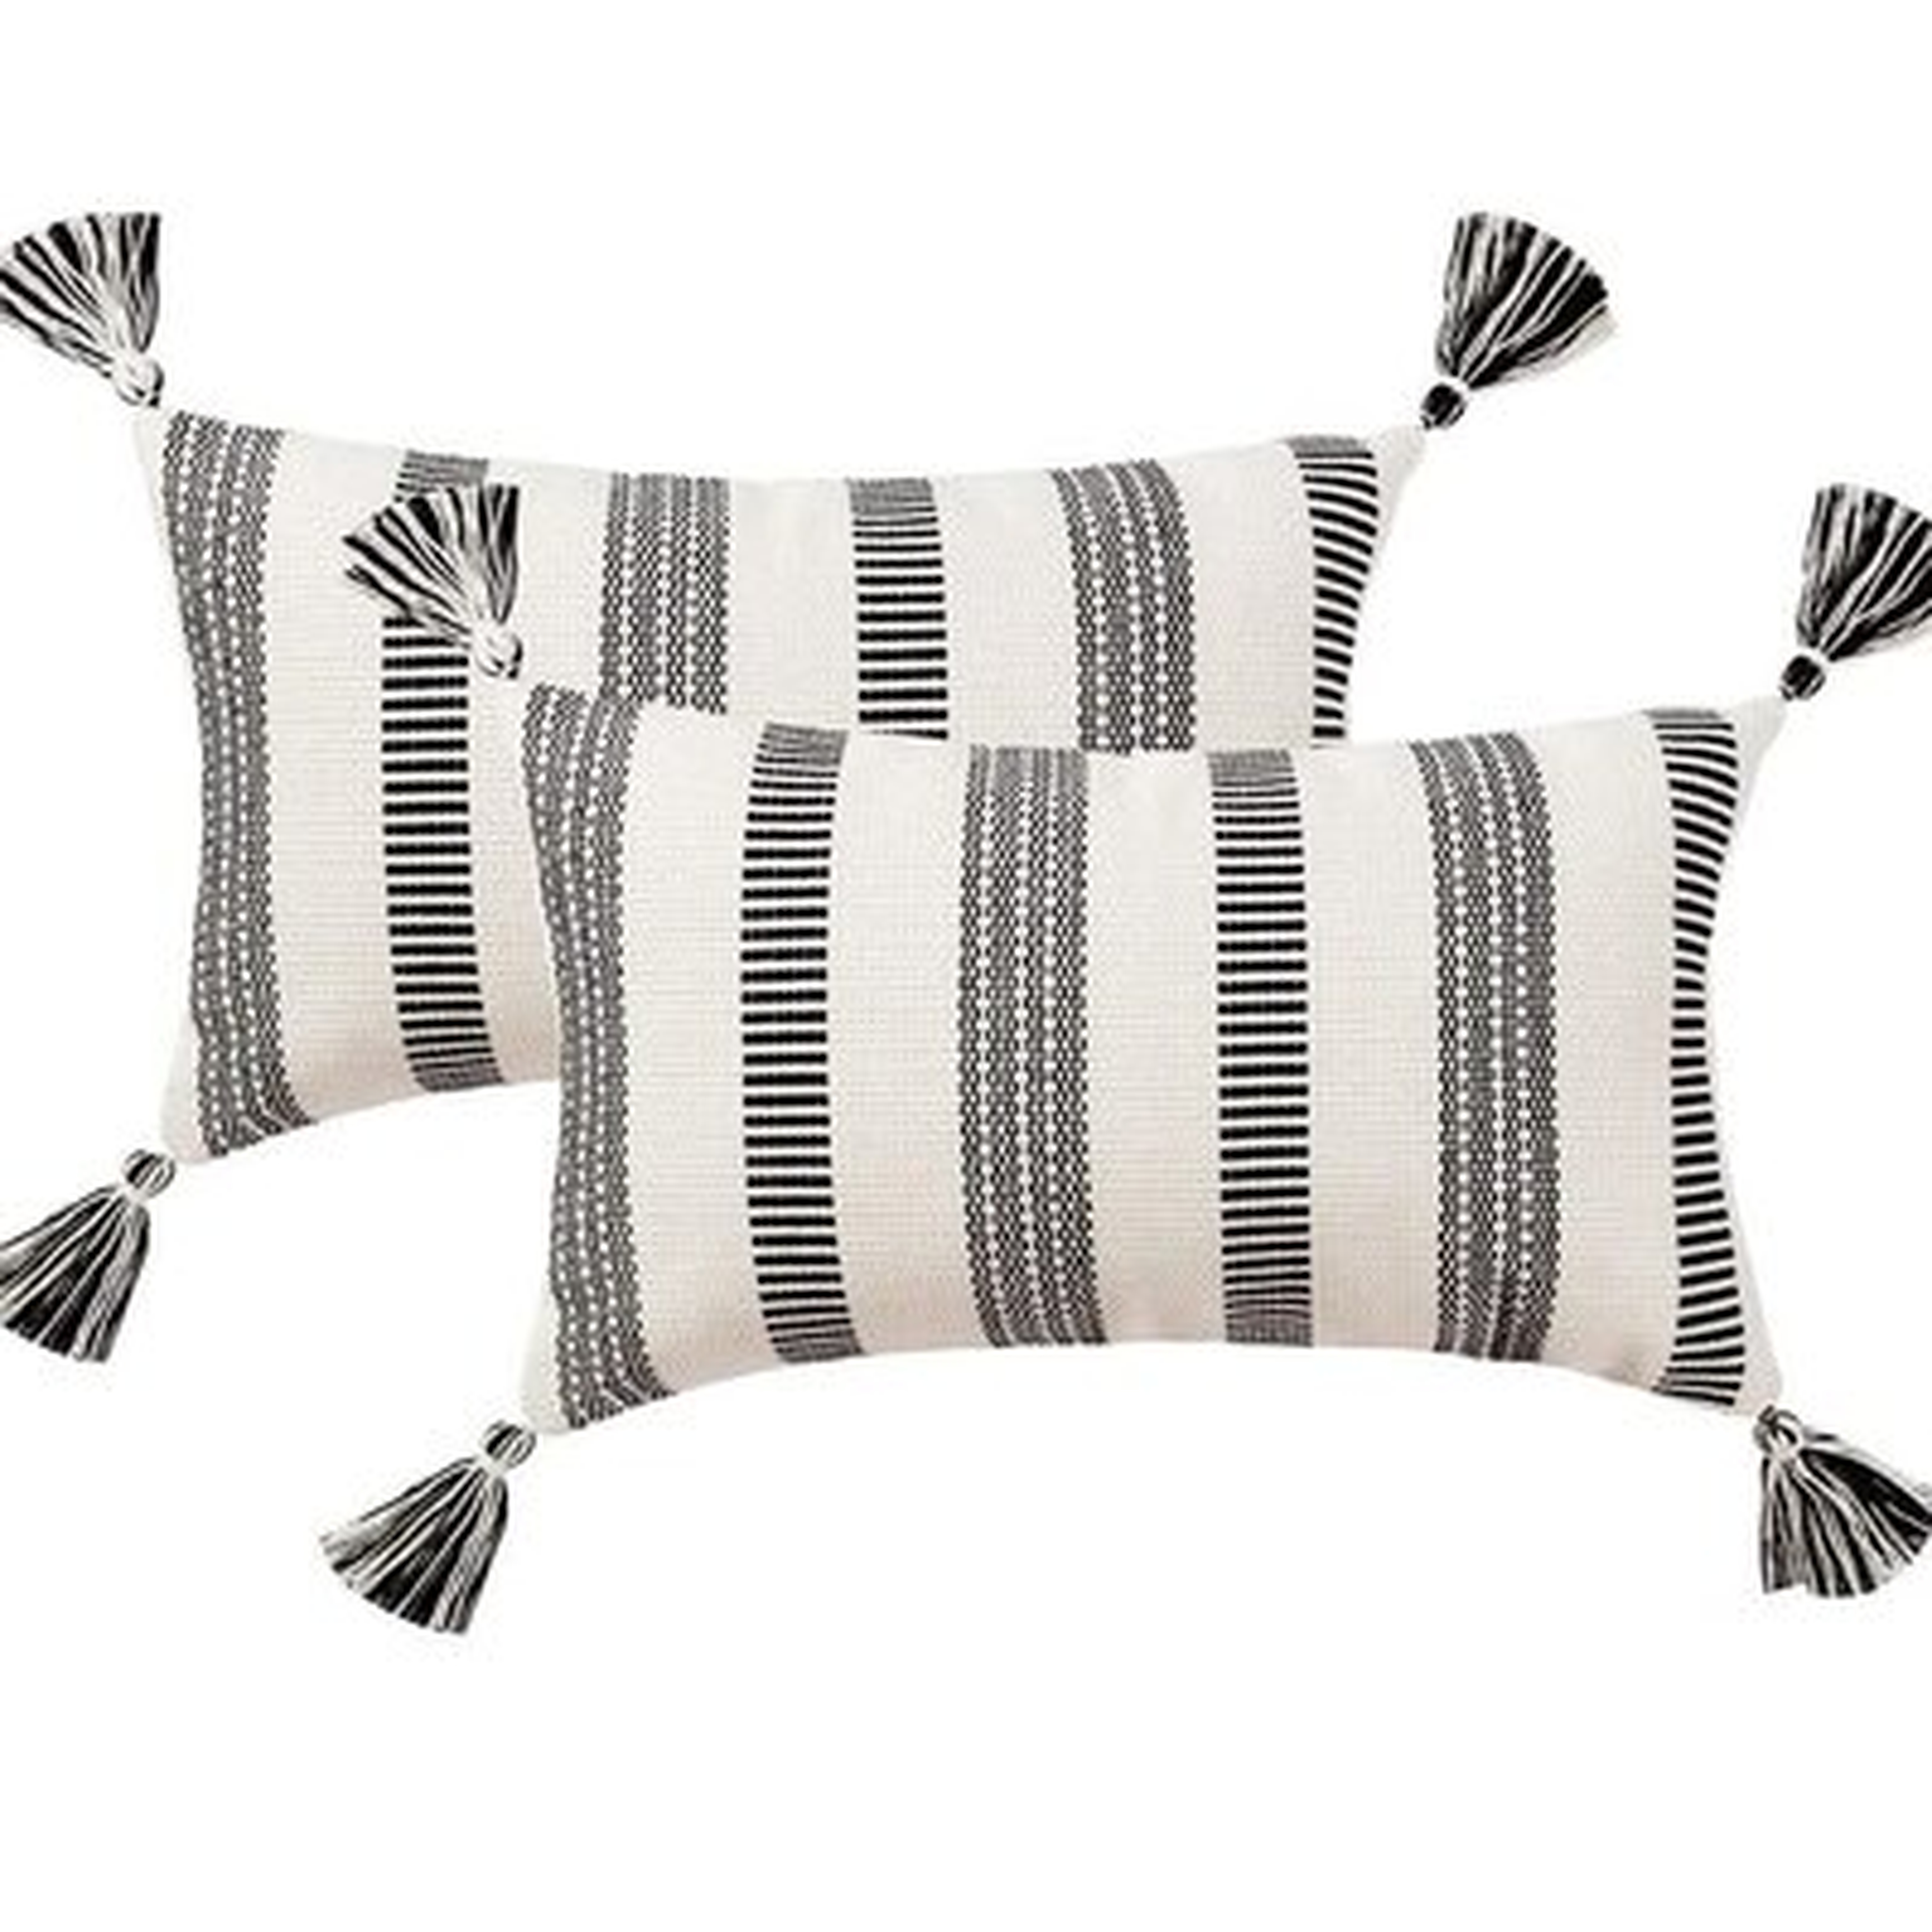 Set Of 2 Cotton Woven Lumbar Throw Pillow Covers, Black White Stripe Neutral Pillow Cases, Small Decorative Cushion Cover (12X20 Inches, 2 Pack) - Wayfair